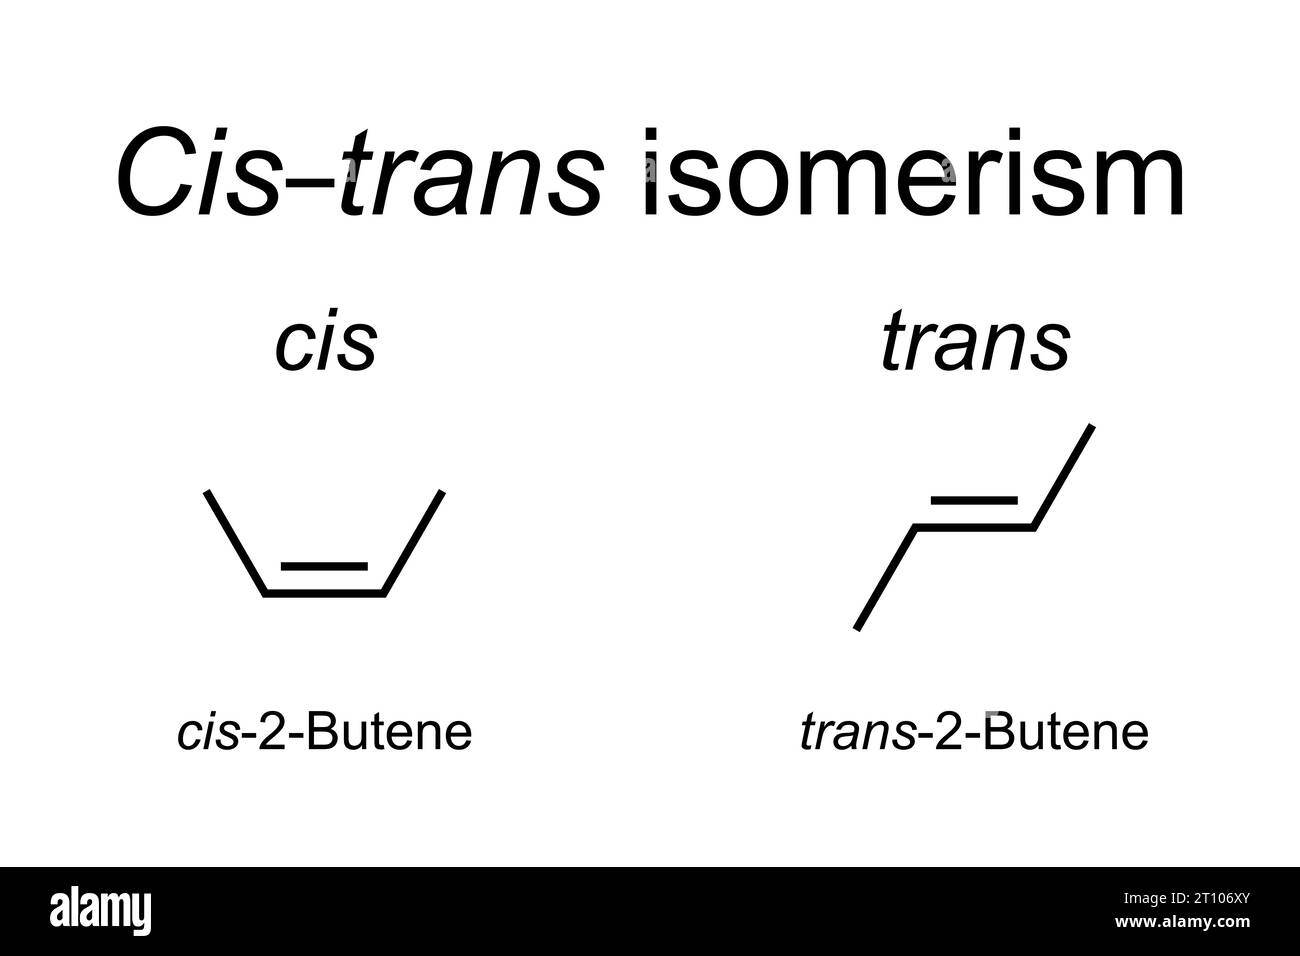 Cis-trans isomerism in chemistry, shown at butene. Cis indicates the functional groups on same side, trans conveys that they are opposing. Stock Photo